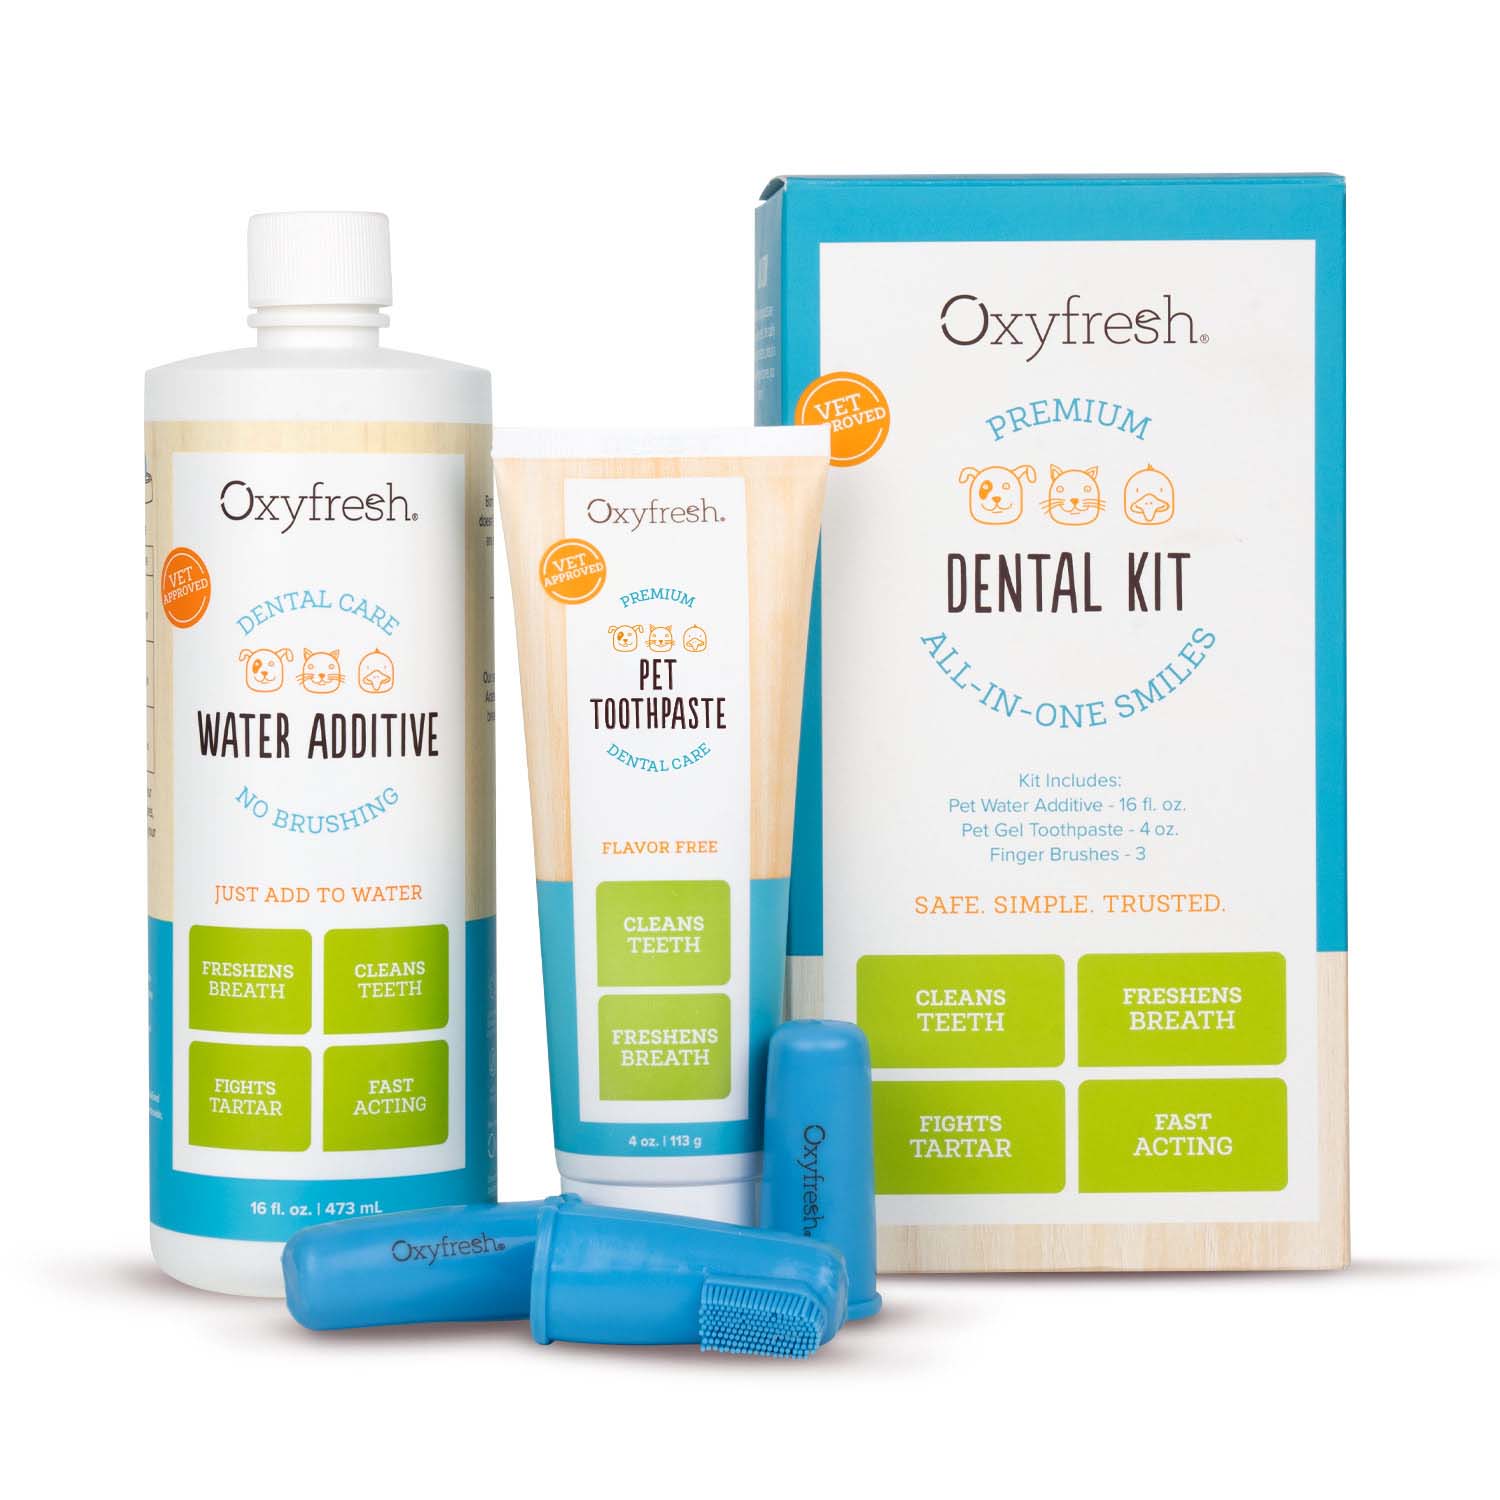 #size_Oxyfresh Pet Dental Kit large size with 16oz pet water additive, 4 oz pet toothpaste and 3 silicone finger brushes